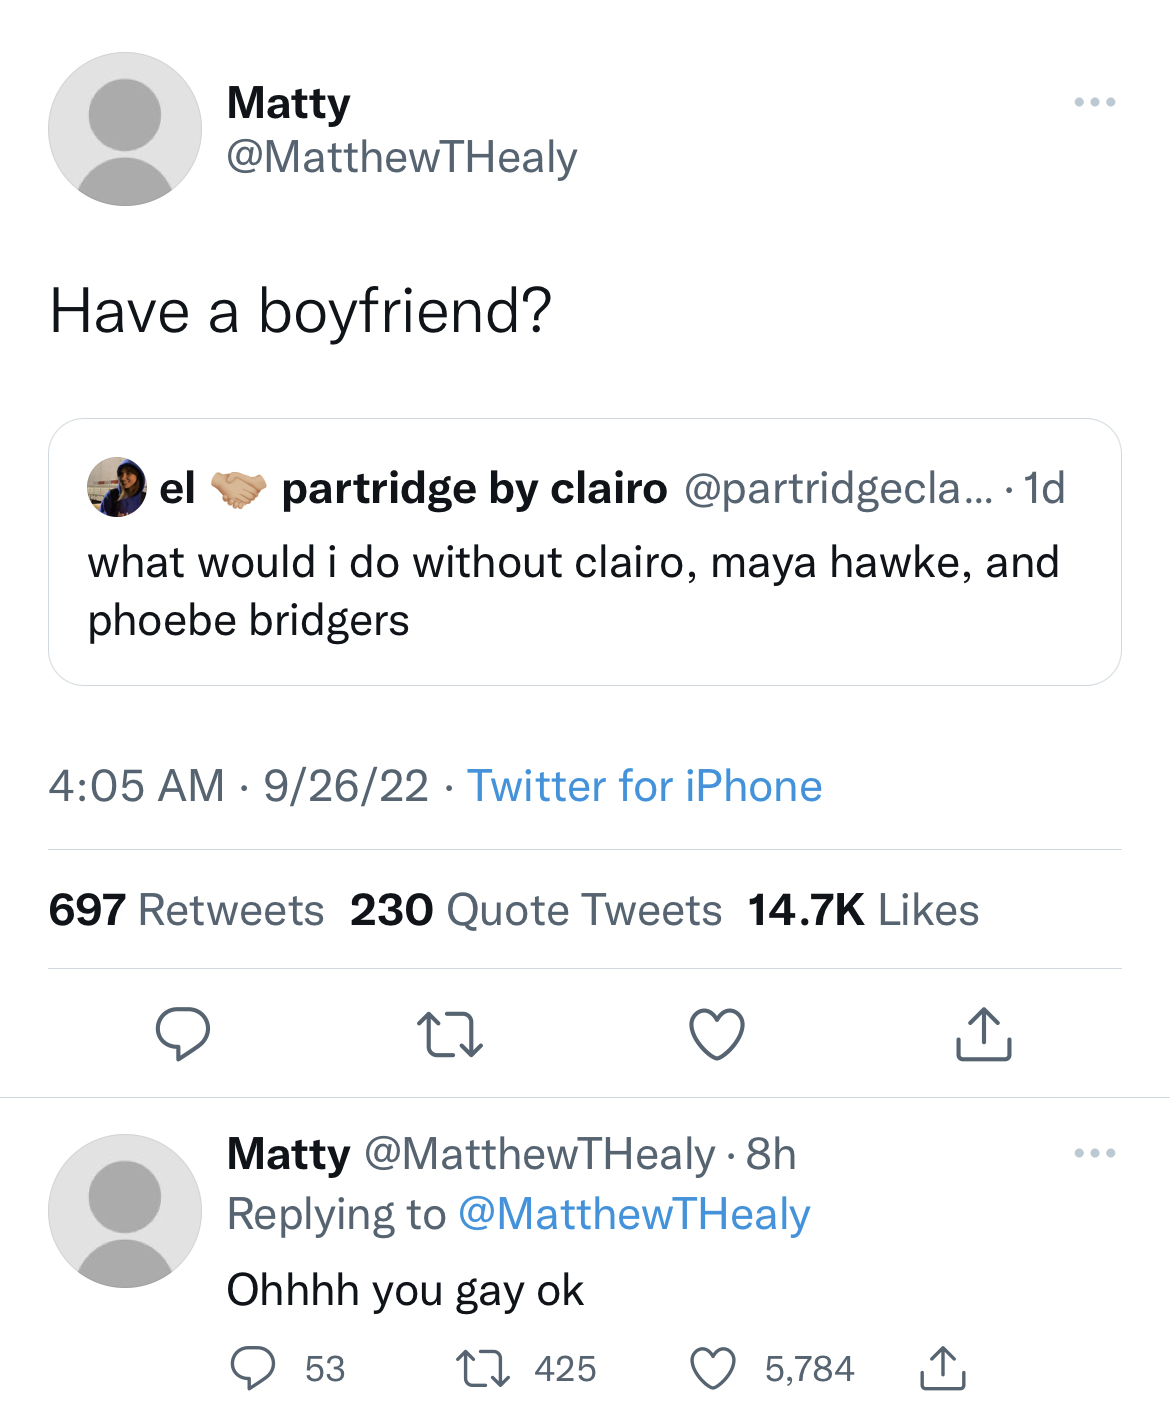 Funny tweets - number - Matty Have a boyfriend? el partridge by clairo .... 1d what would i do without clairo, maya hawke, and phoebe bridgers 92622 Twitter for iPhone 697 230 Quote Tweets 27 Matty . 8h Ohhhh you gay ok 53 425 5,784